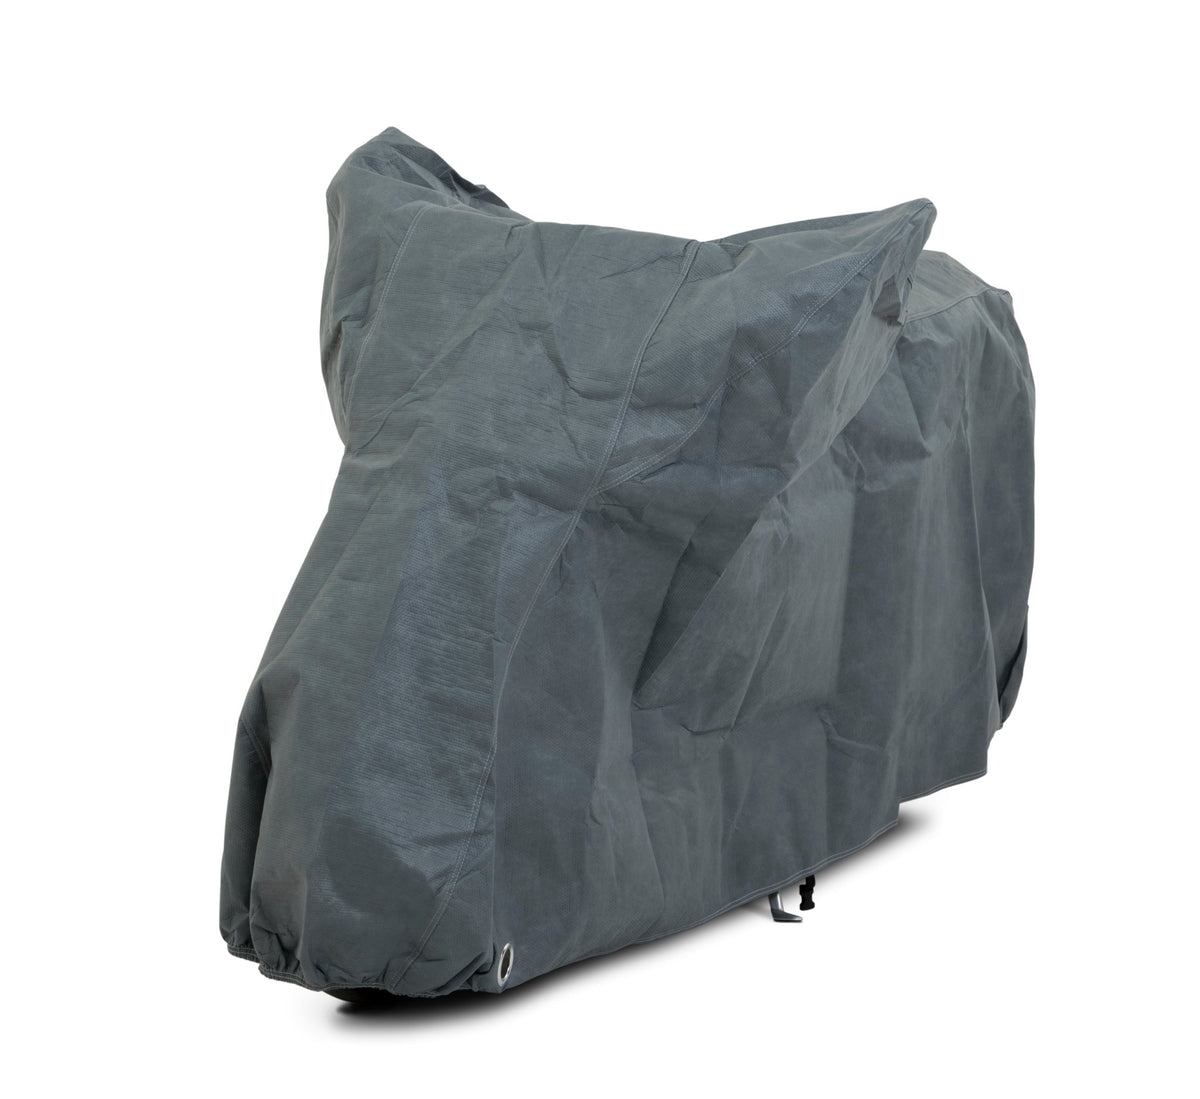 Stormforce best outdoor motorcycle covers for CAGIVA - Storm Motorcycle Covers